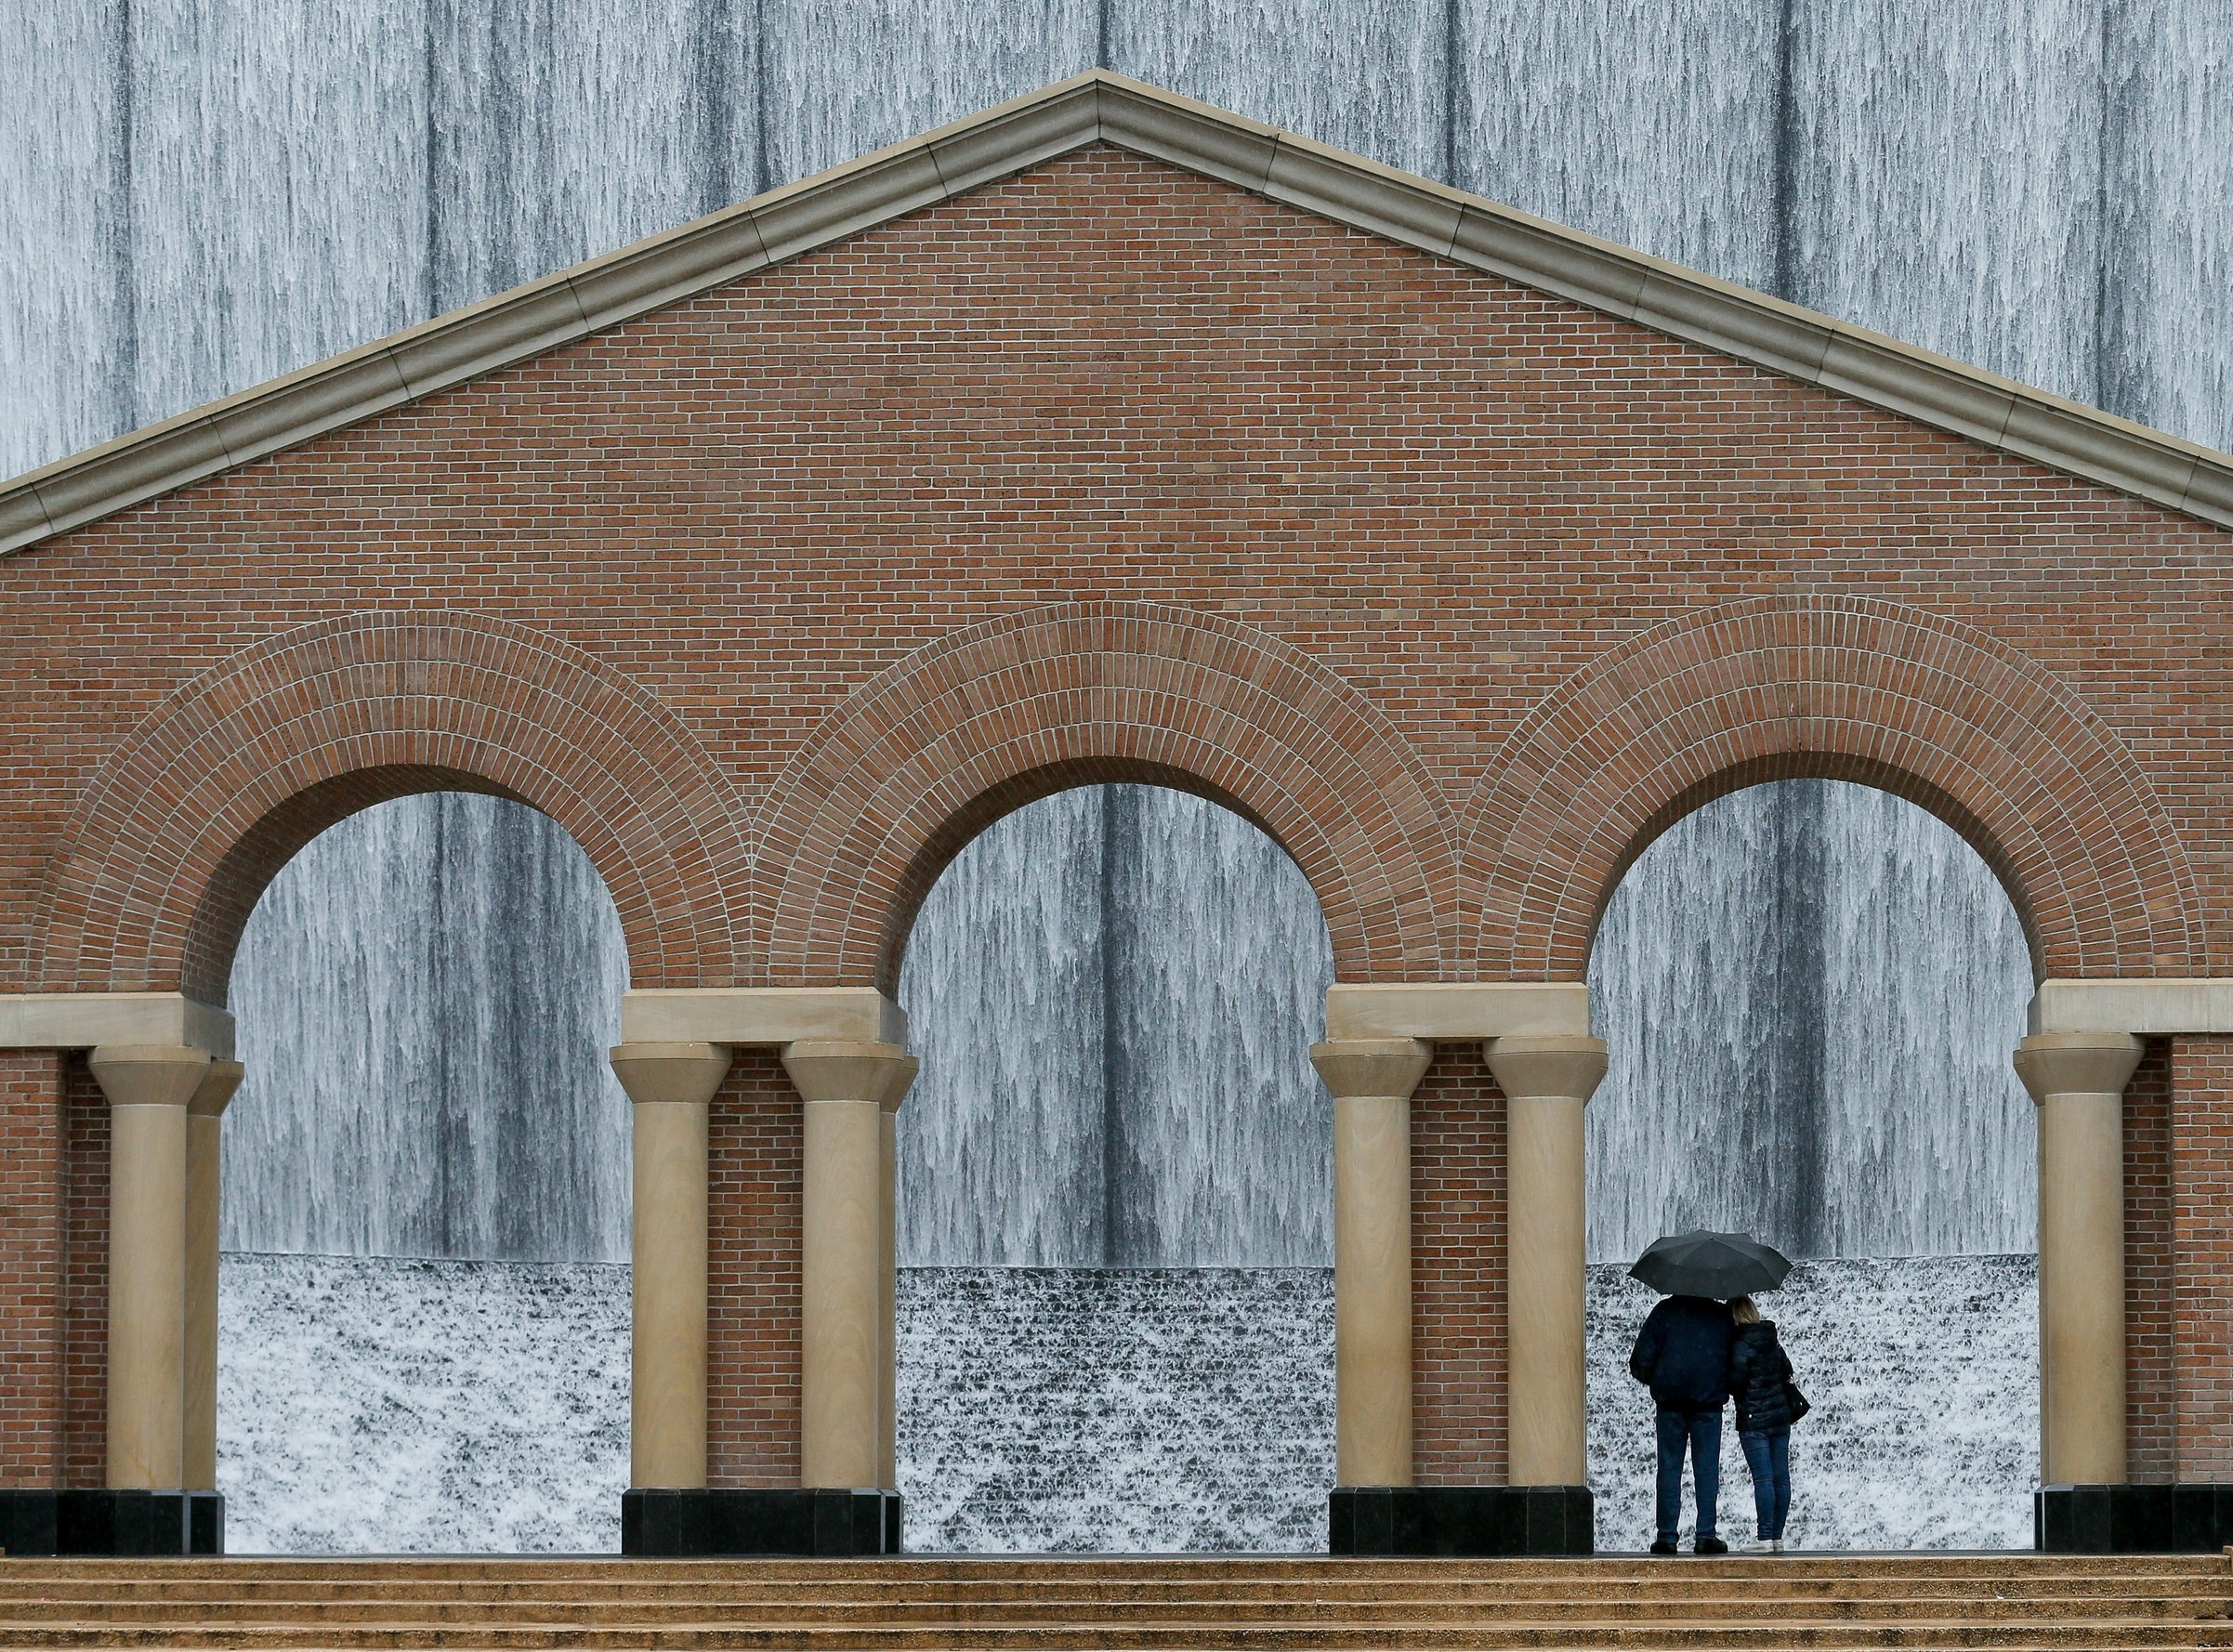  Art Solda, 72, left, and his fiancee Tatiana braved the rain to check out the Williams Tower Water Wall on Wednesday, Jan. 22, 2020, in Houston, Texas. The couple was traveling to Savannah, Georgia, where they will be getting married in early Februa